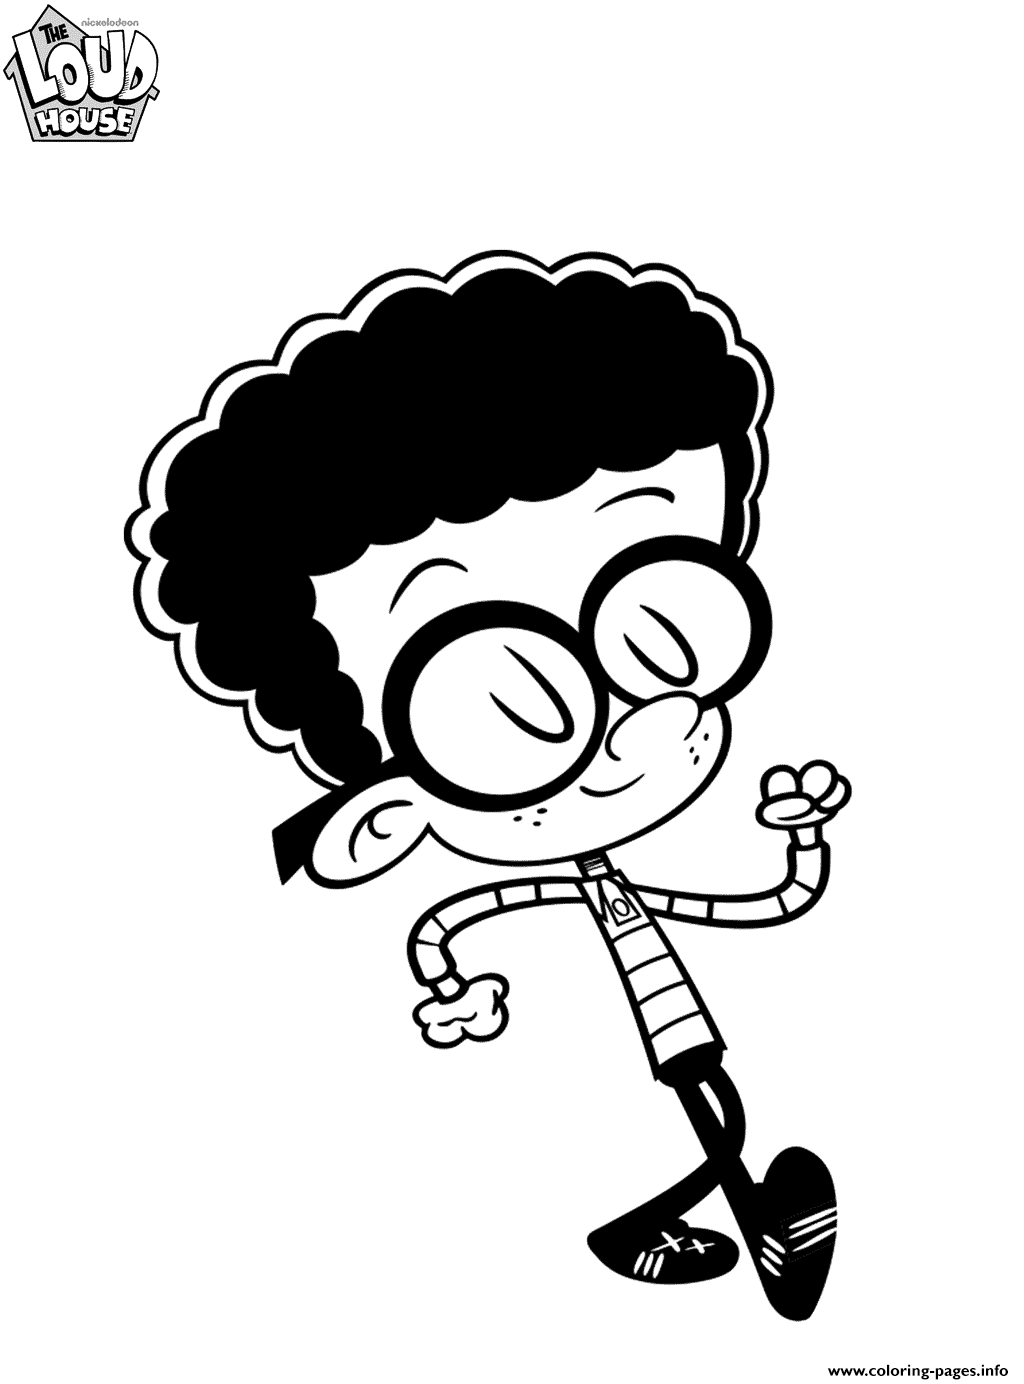 Clyde Loud House Coloring Pages Printable